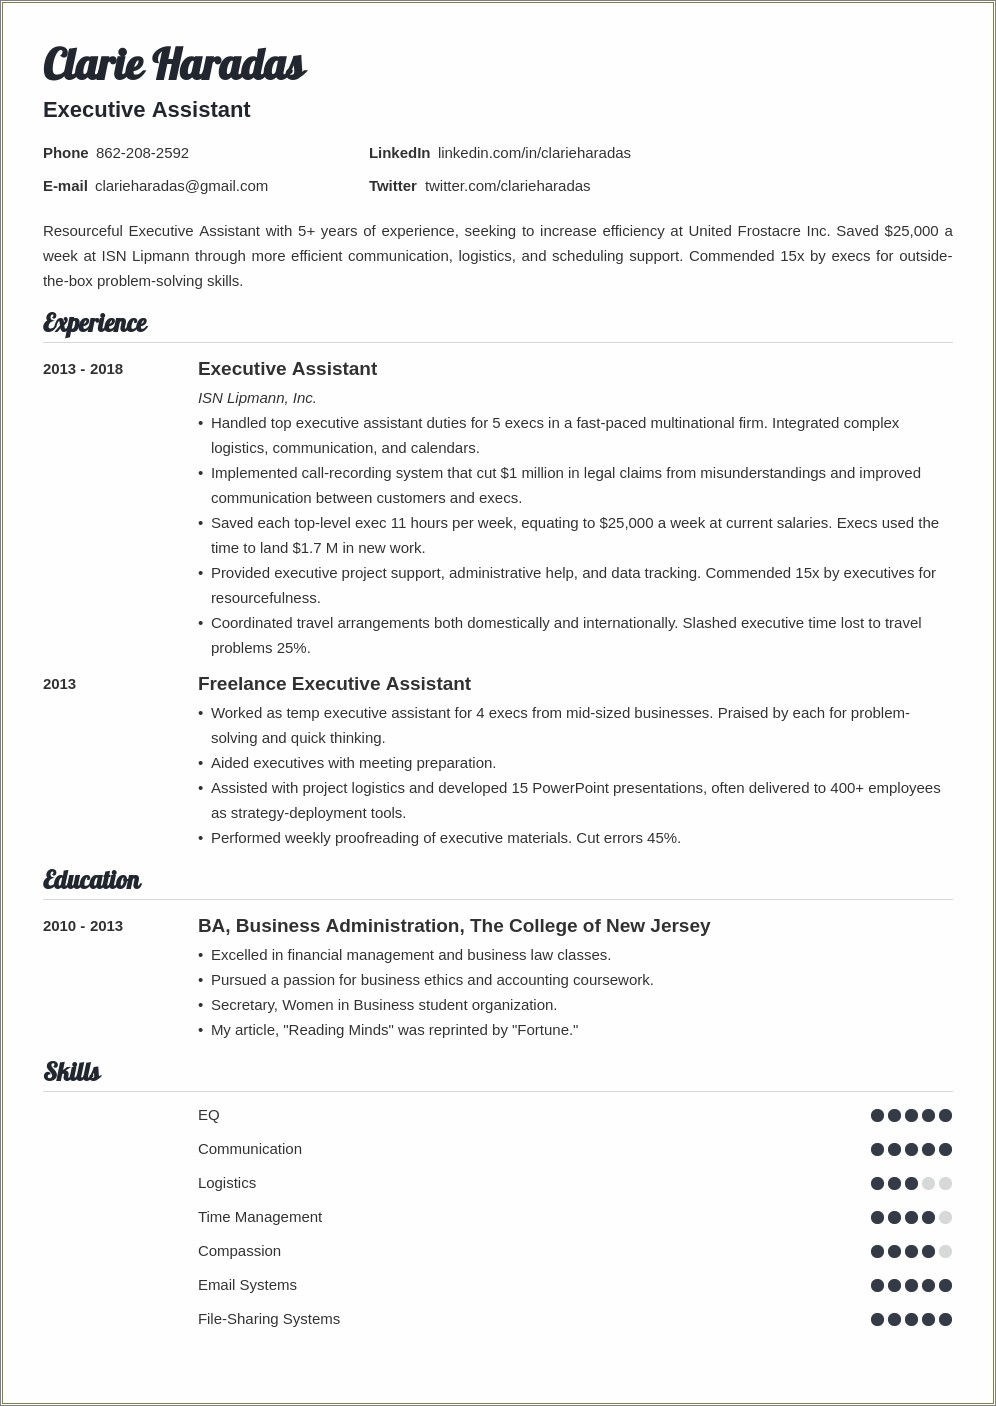 Administrative Assistant Good Summary In Resume